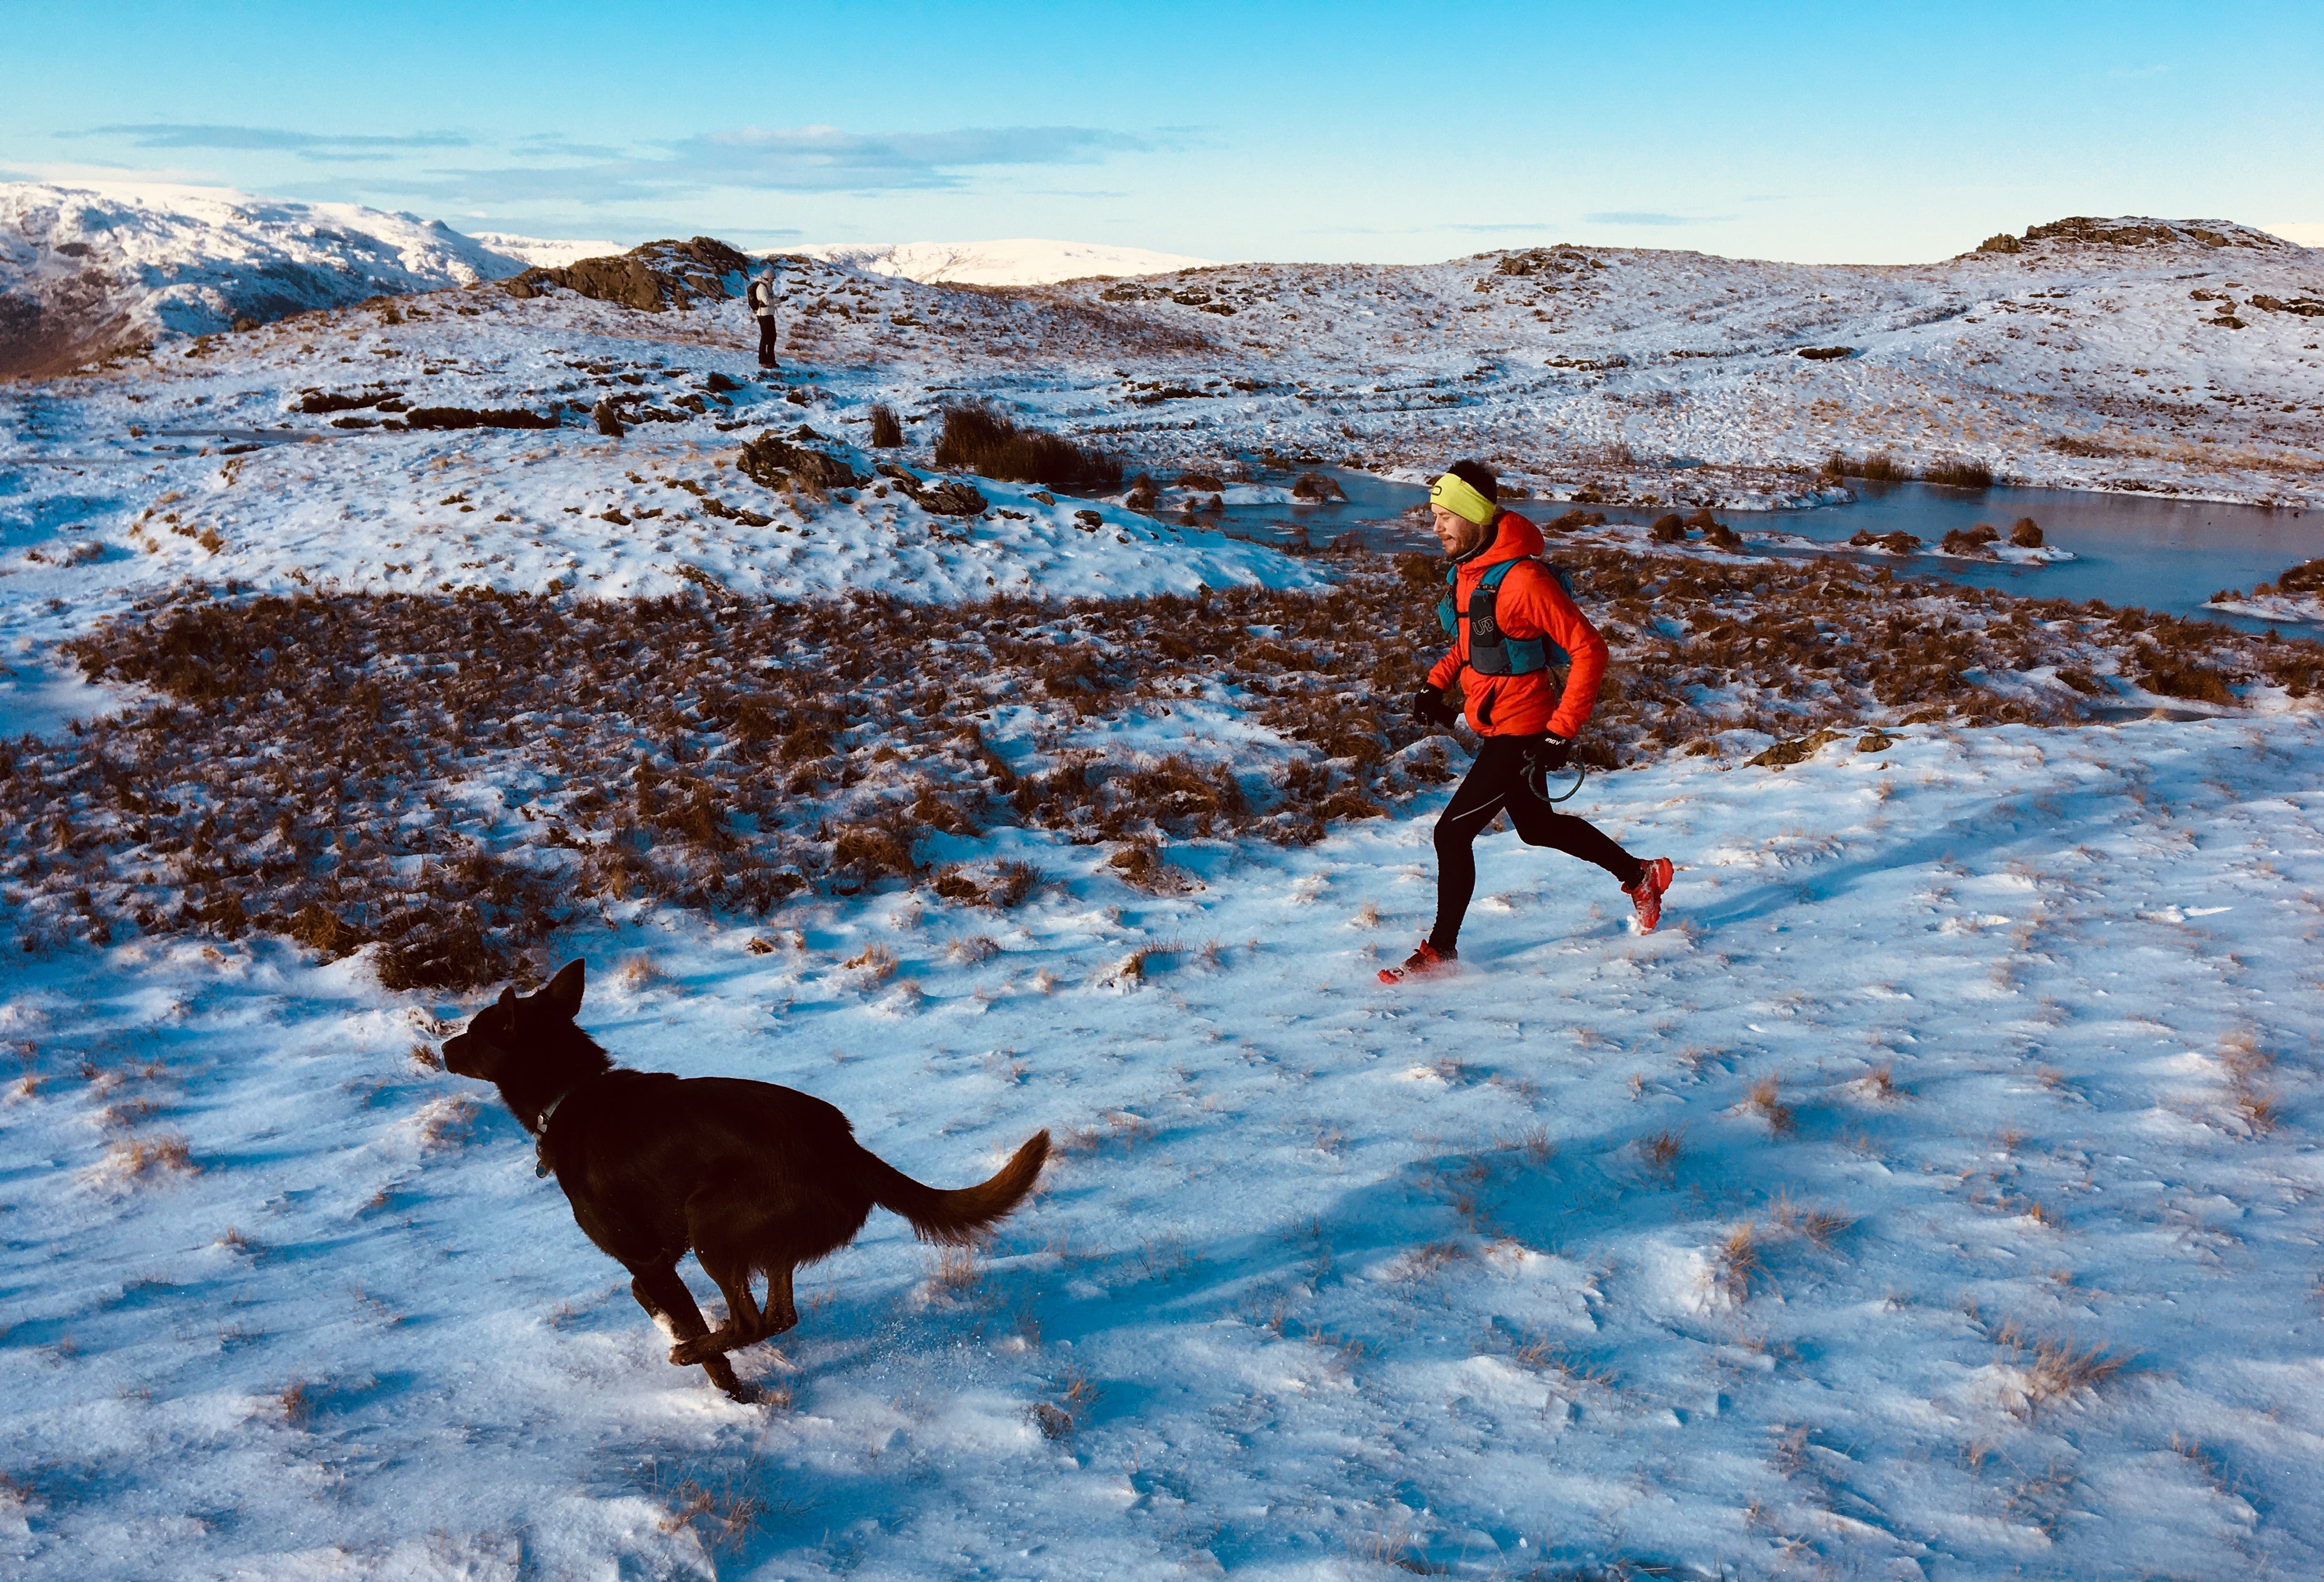 Winter trail running in the snow